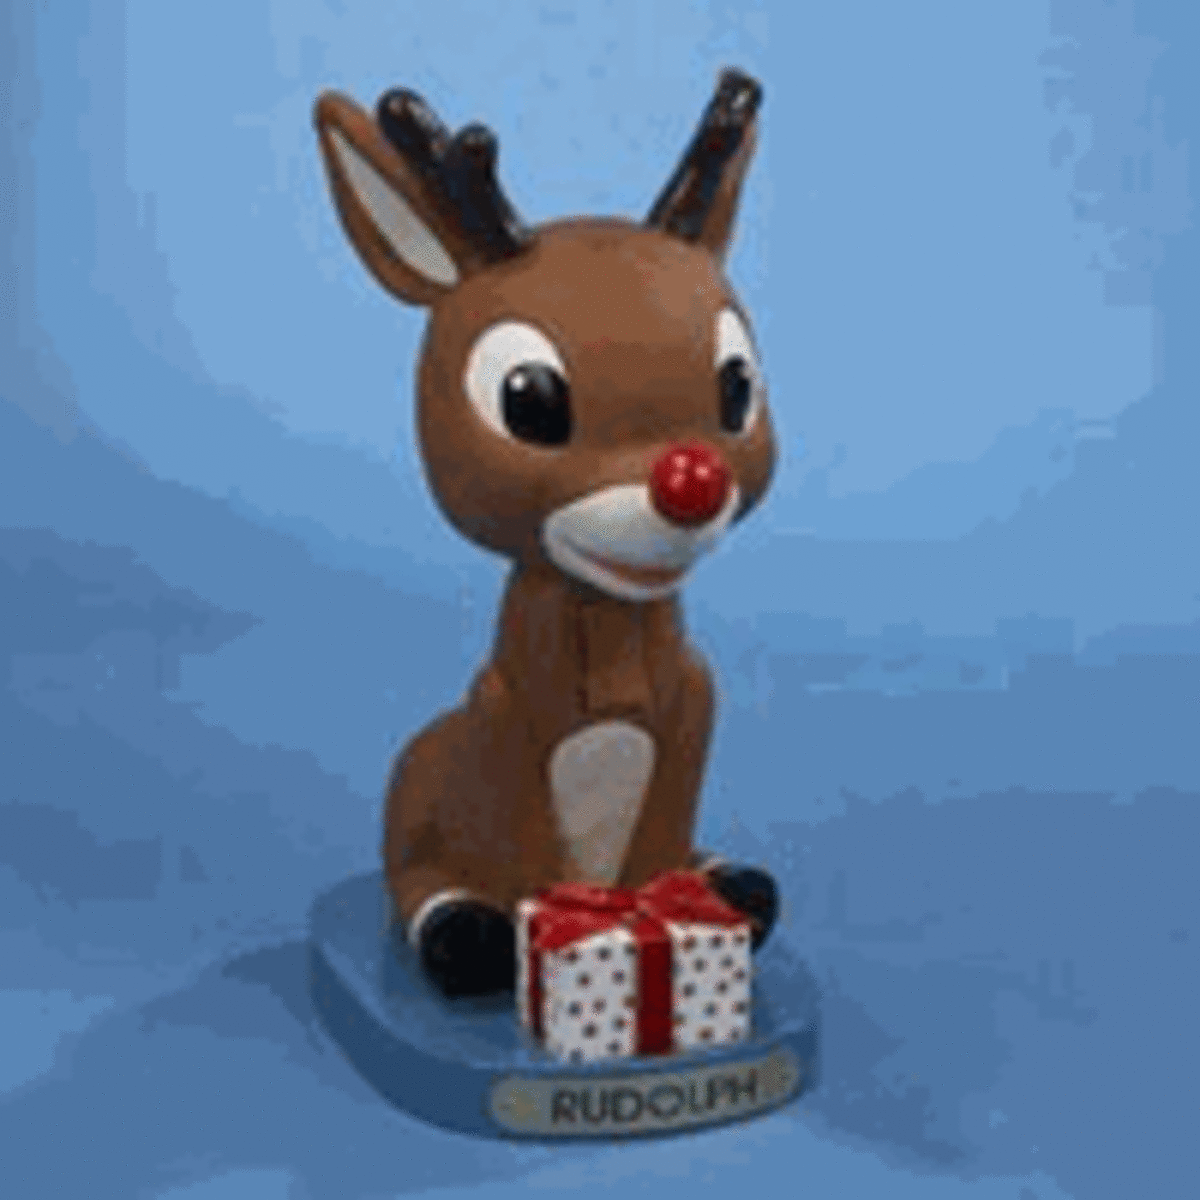 rudolph-the-red-nosed-reindeer-gifts